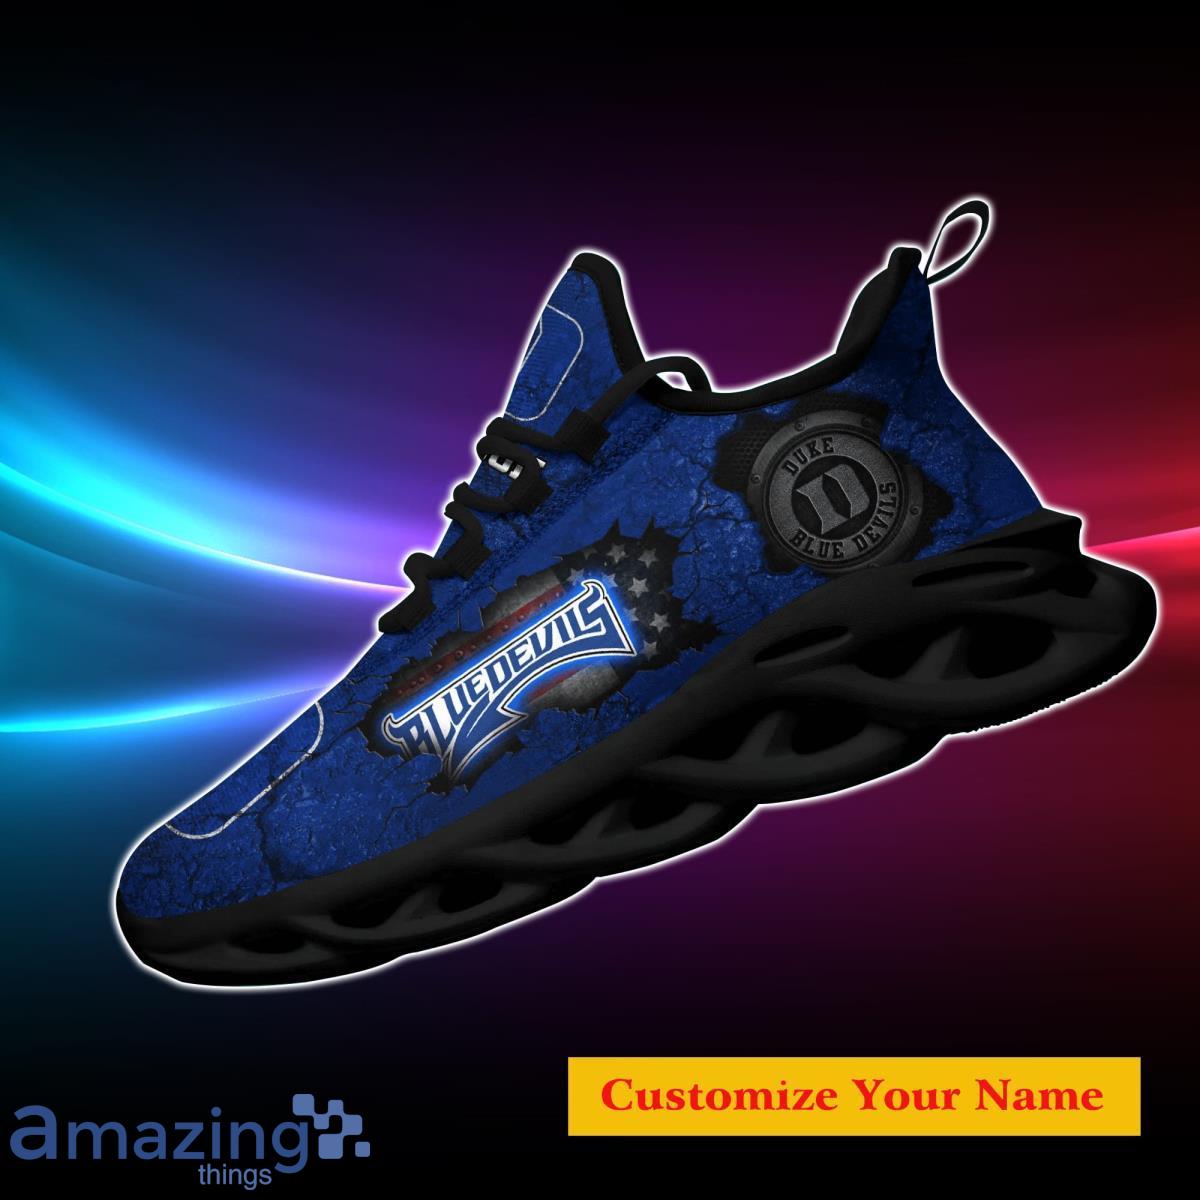 duke blue devils ncaa2 custom name max soul shoes clunky sneakers great gift for men women fans 3